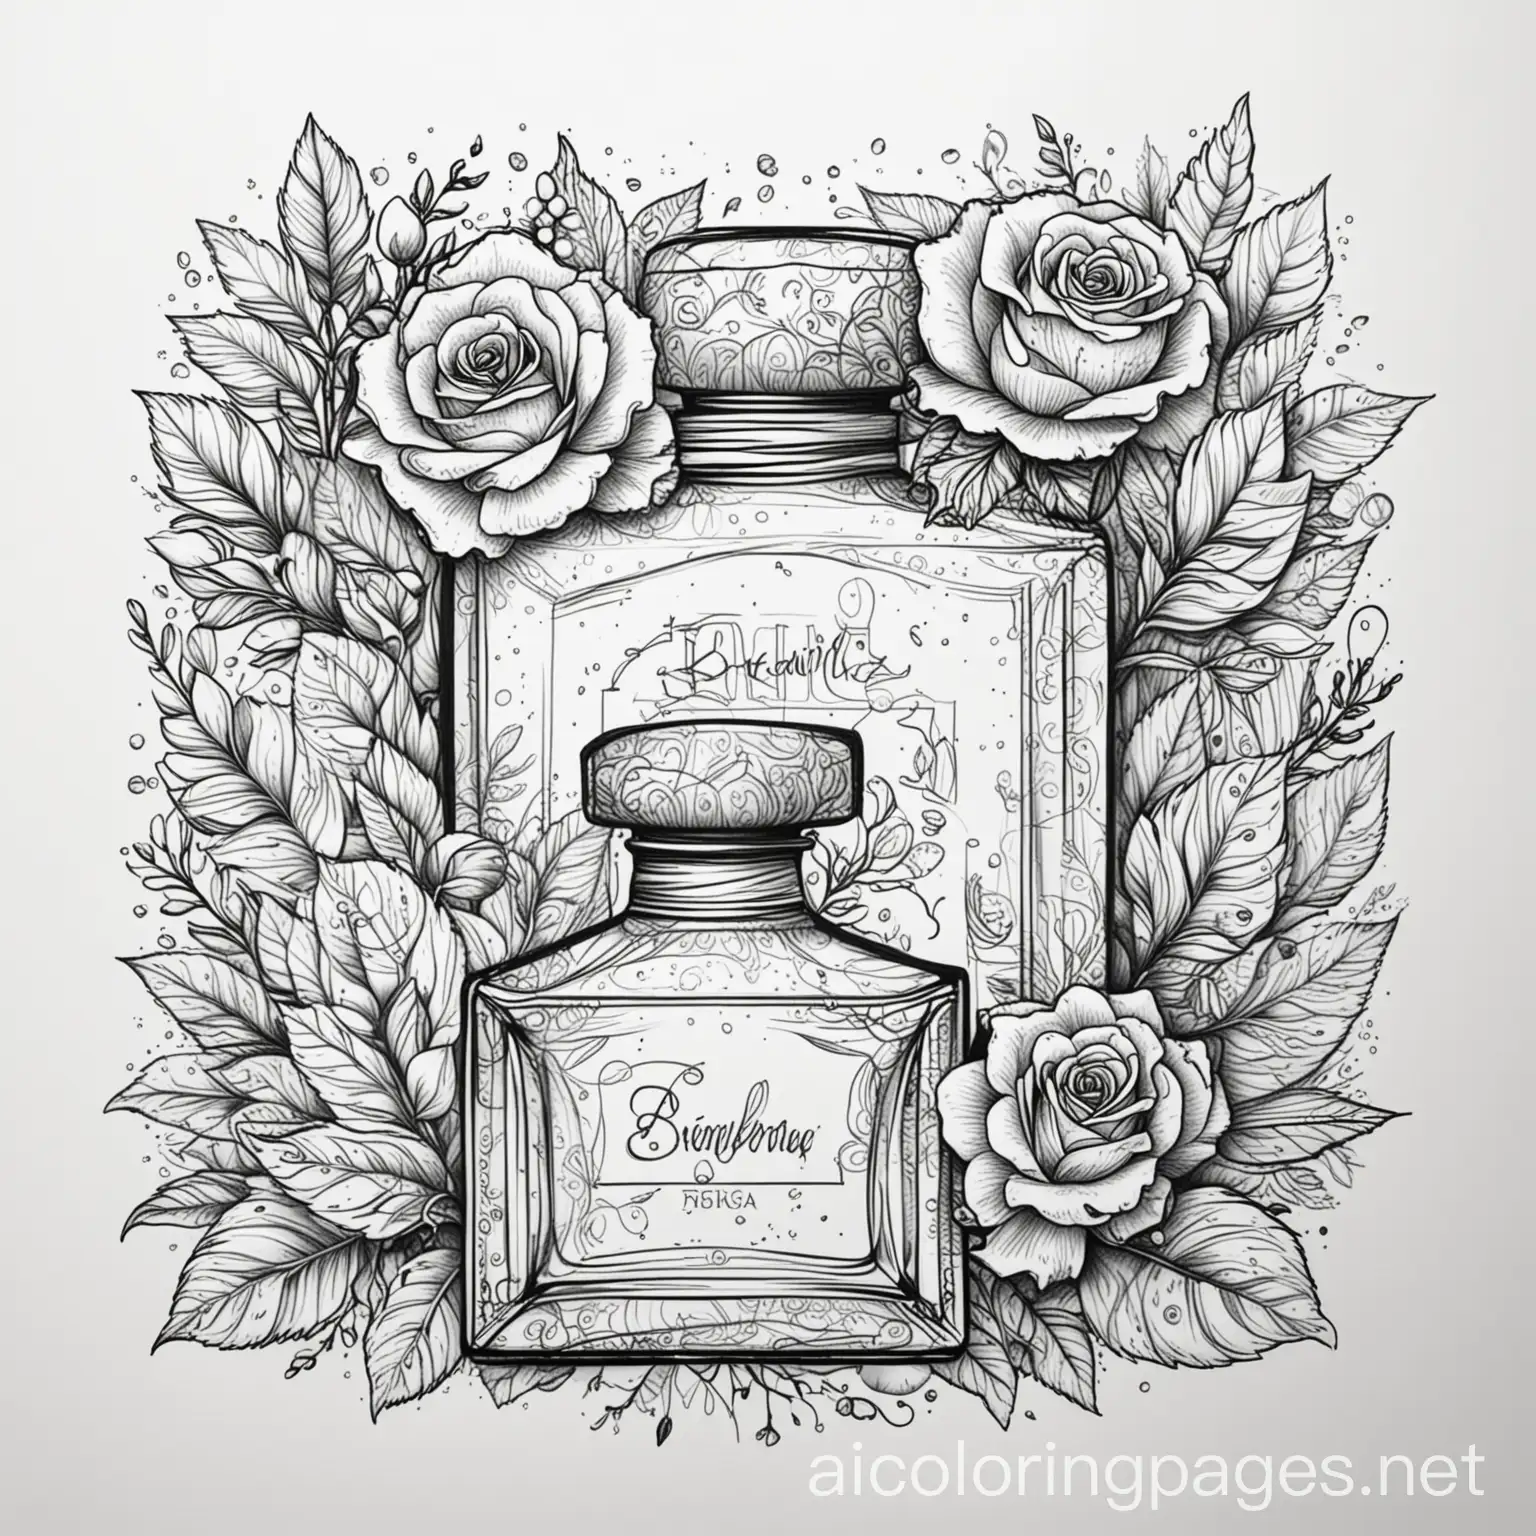 Doodle de una decoración de arbusto con rosas y frascos de perfume elegantes , Coloring Page, black and white, line art, white background, Simplicity, Ample White Space. The background of the coloring page is plain white to make it easy for young children to color within the lines. The outlines of all the subjects are easy to distinguish, making it simple for kids to color without too much difficulty